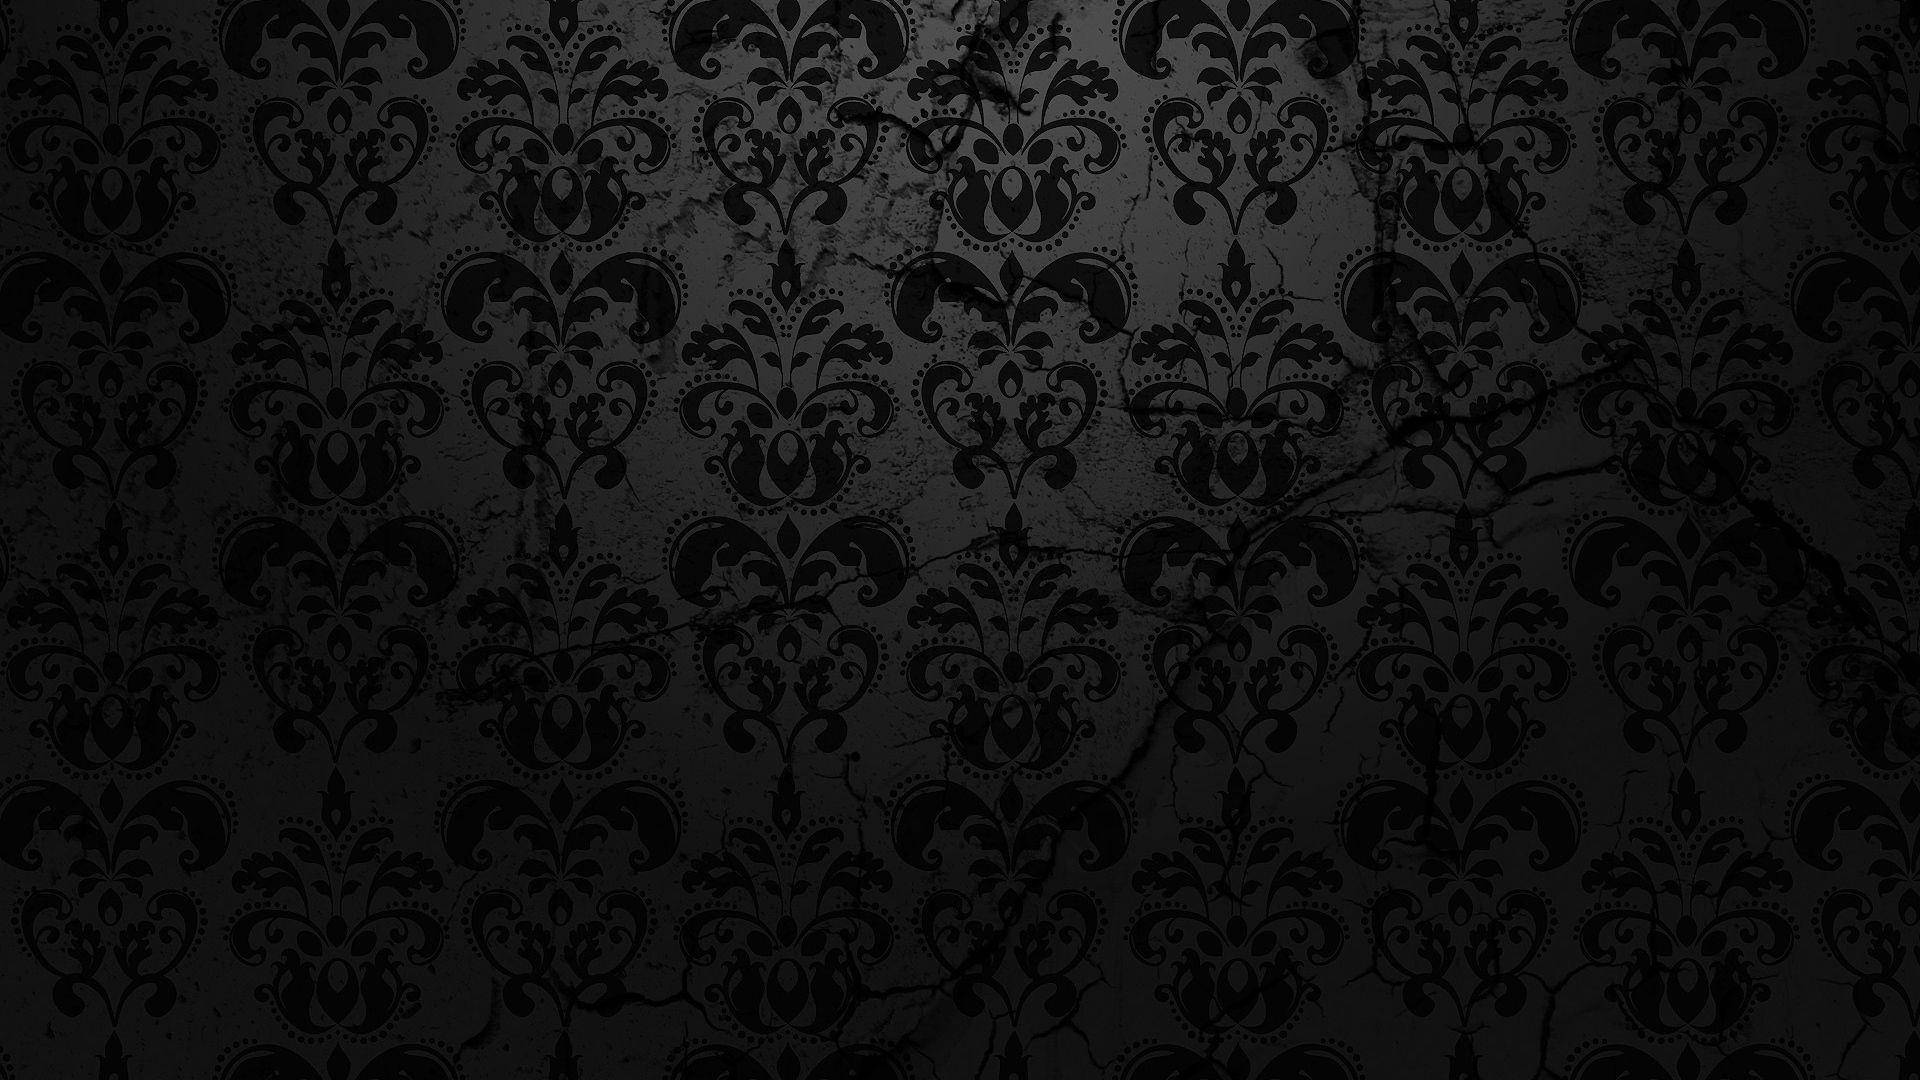 Plain Black With Ornate Floral Pattern Background